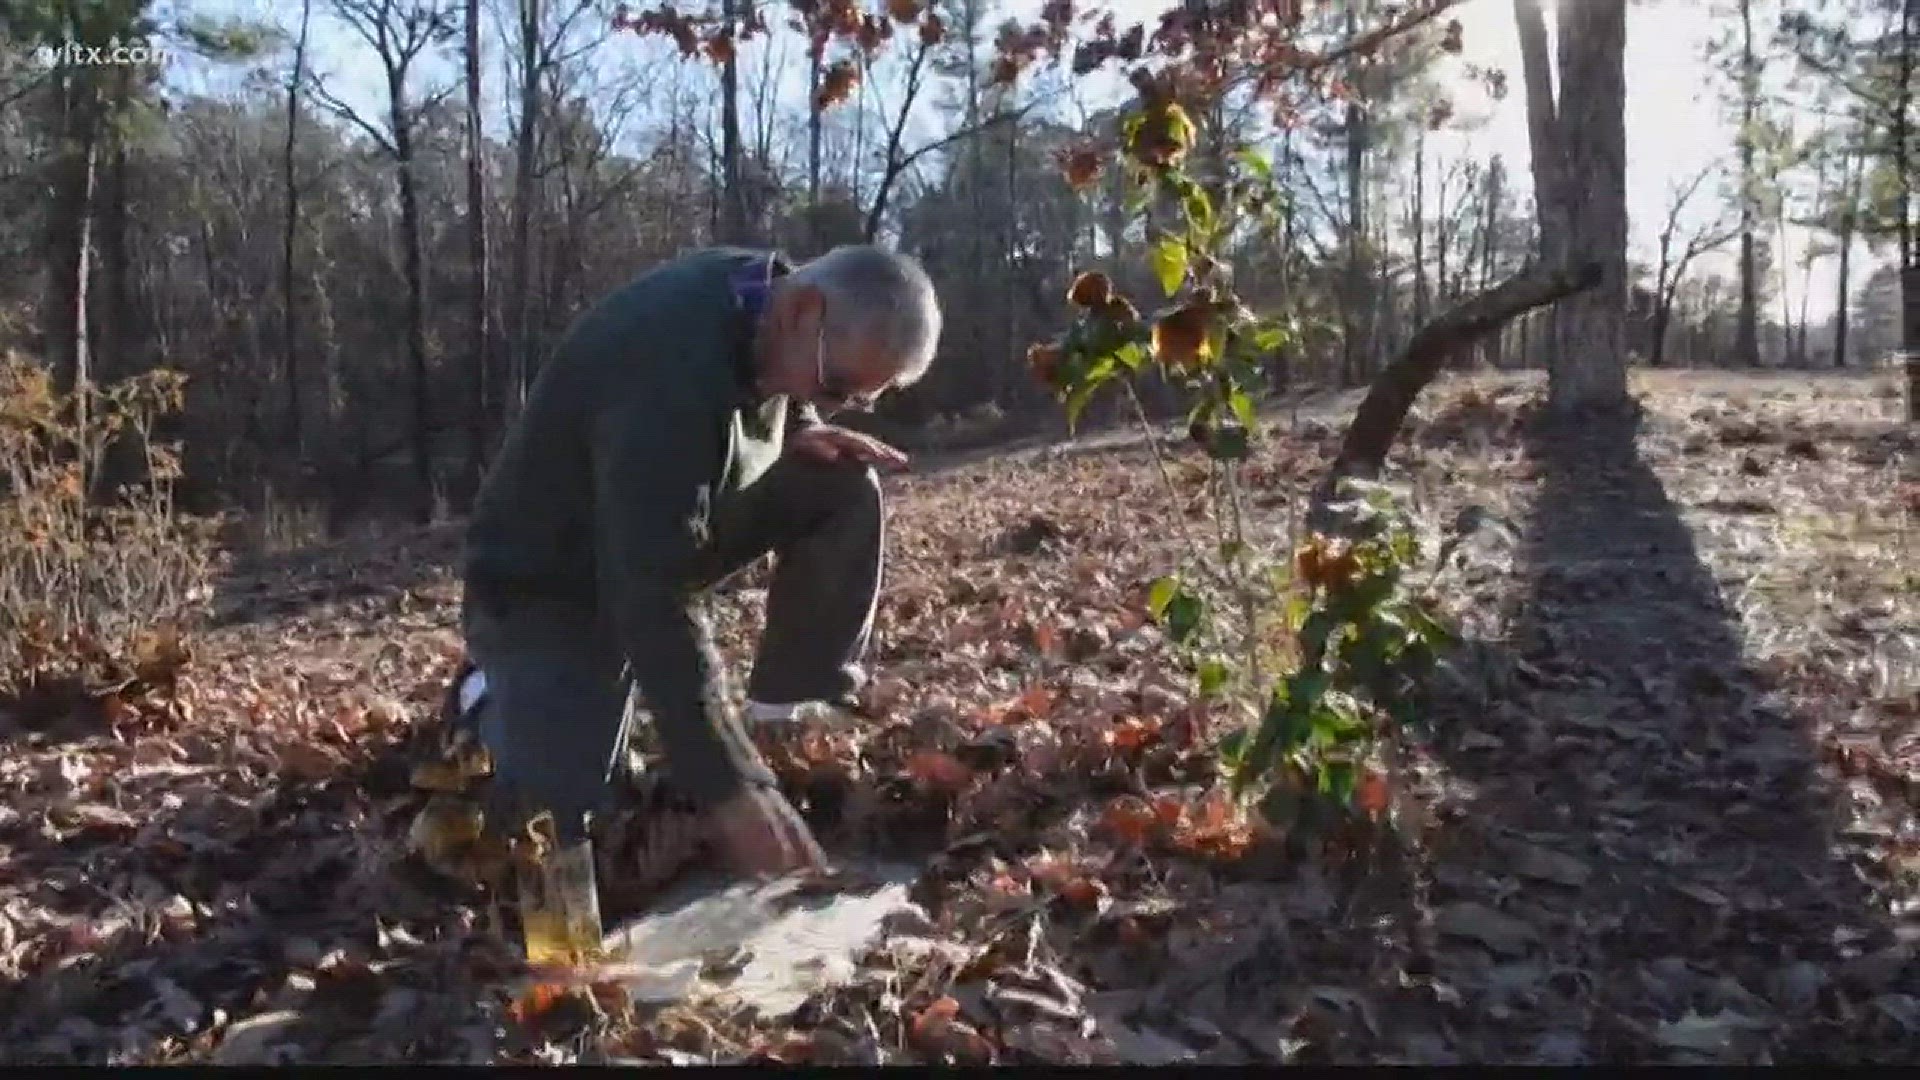 Ronnie Watts runs the Greenhaven Preserve cemetery in Eastover, SC after a lifetime of jobs, this 71-year-old has found his calling.